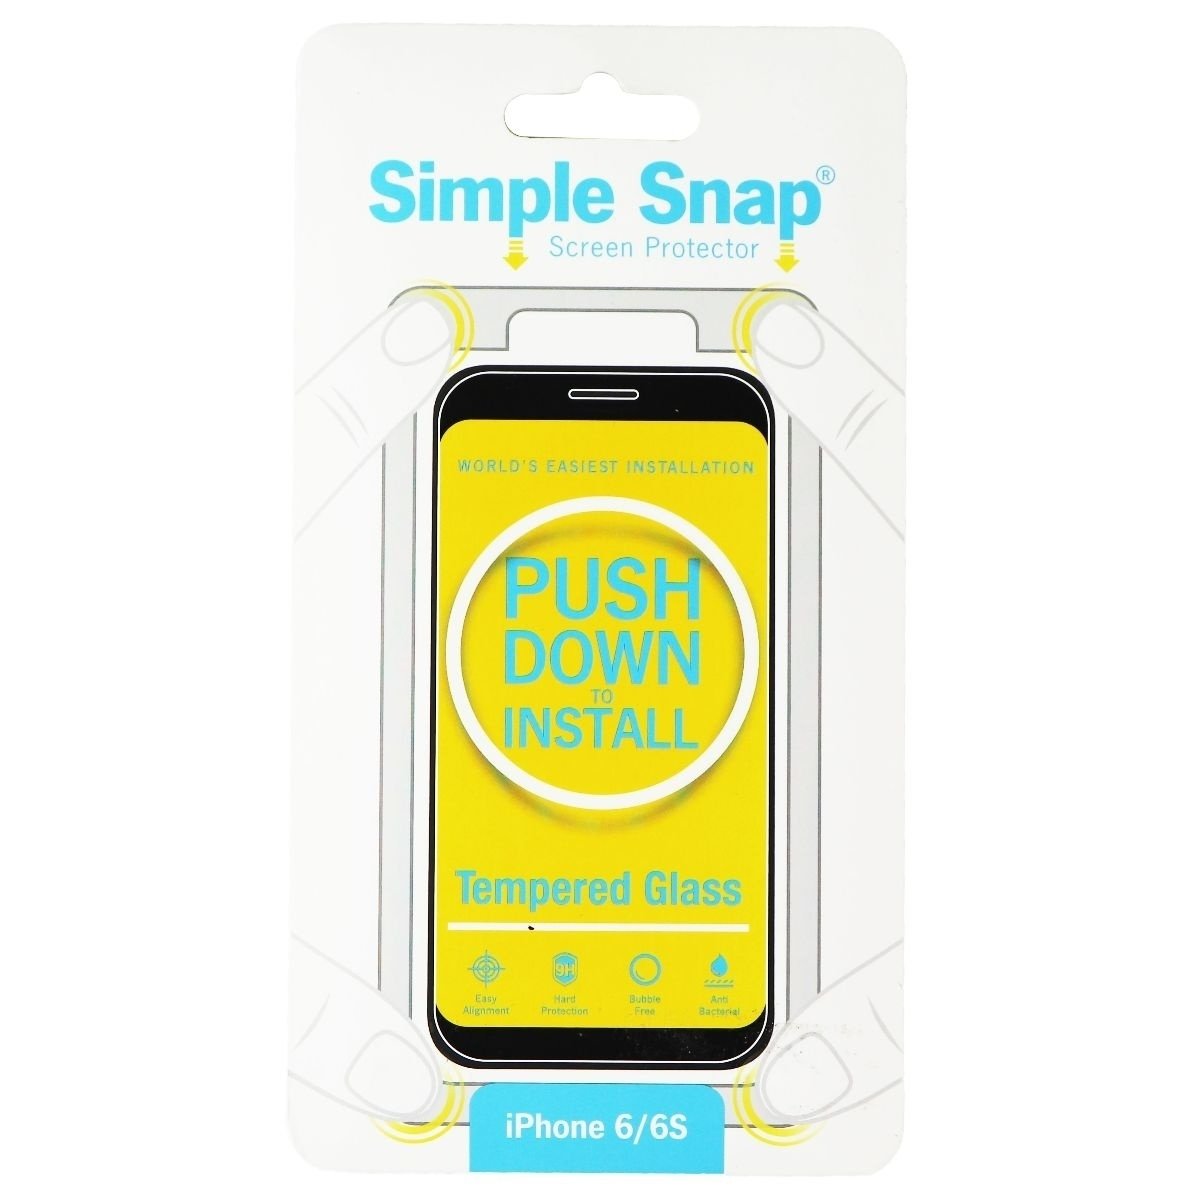 Simple Snap Tempered Glass Screen Protector For IPhone 6s/6 - Clear